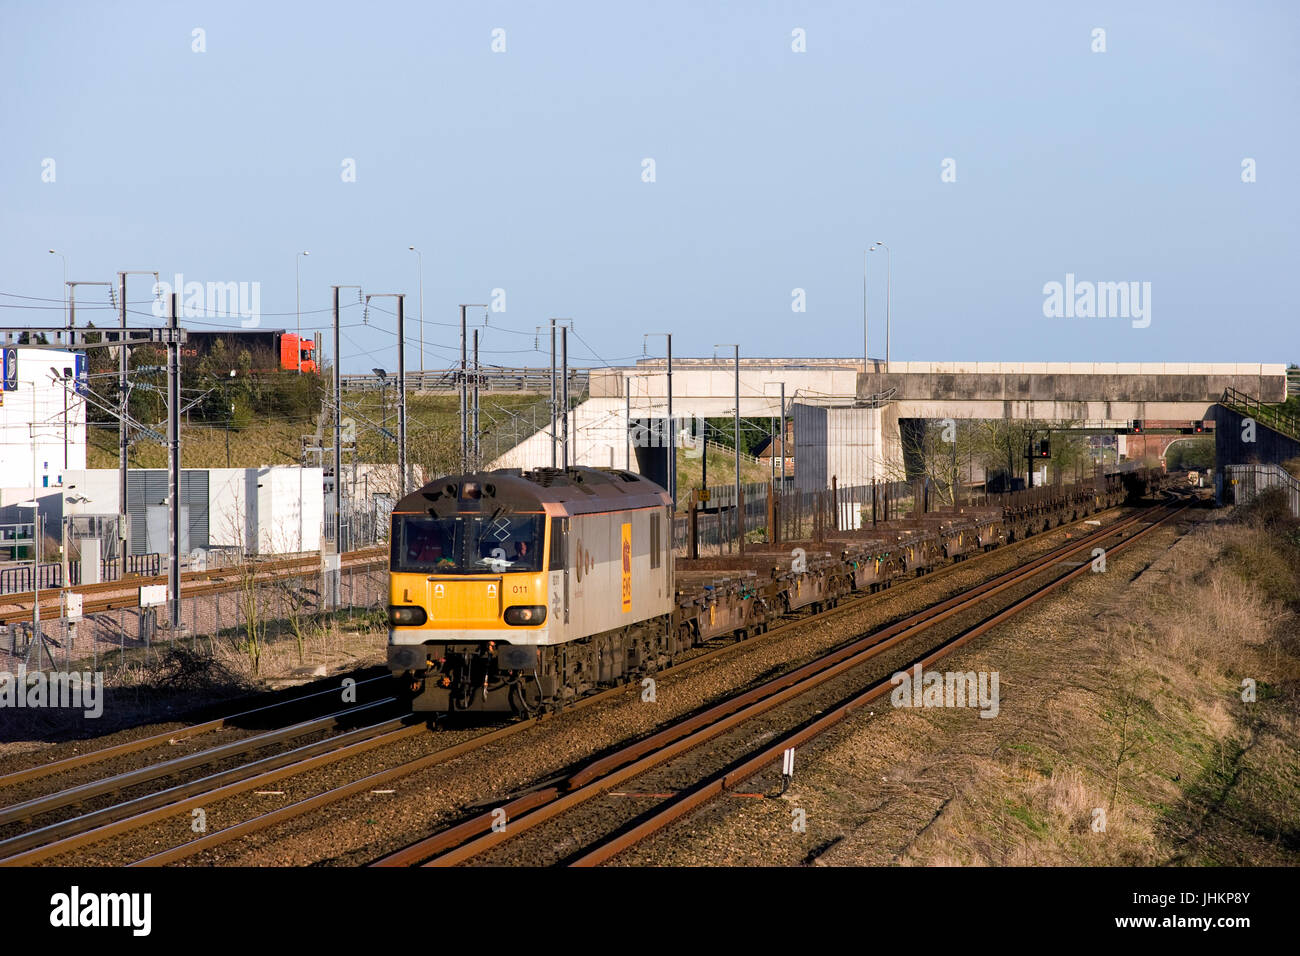 An EWS class 92 electric locomotive number 92011 working an empty steel freight train at Sevington in Kent. Stock Photo